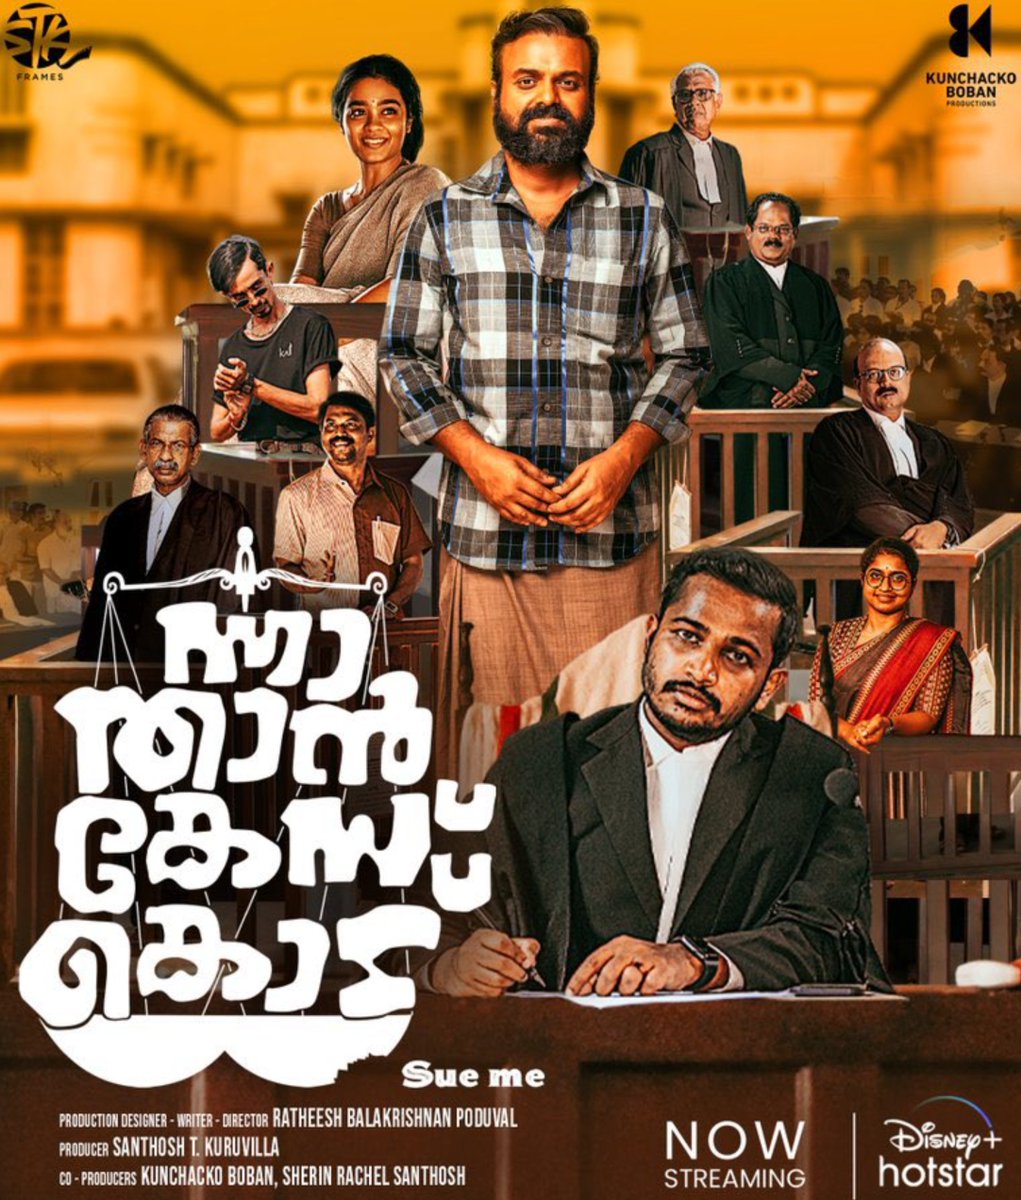 #NnaThanCaseKodu 
Political satire drama of innocent man proving his guilty against minister with road contracts to construction and how he escapes what court gives verdict decides the story this film works only in malayalam in terms of audience watch.